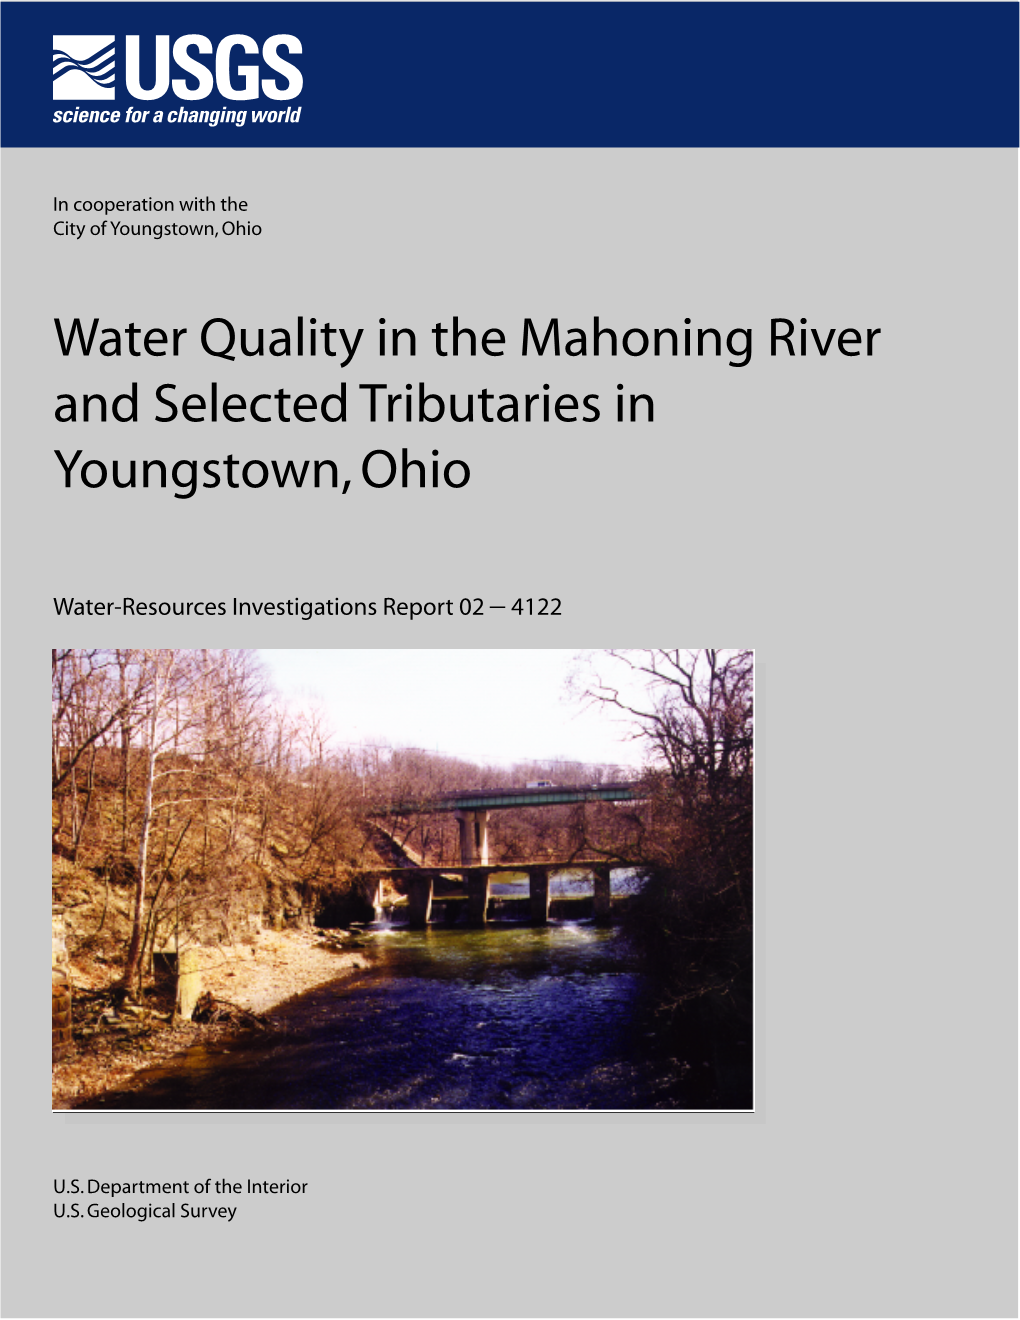 Water Quality in the Mahoning River and Selected Tributaries in Youngstown, Ohio